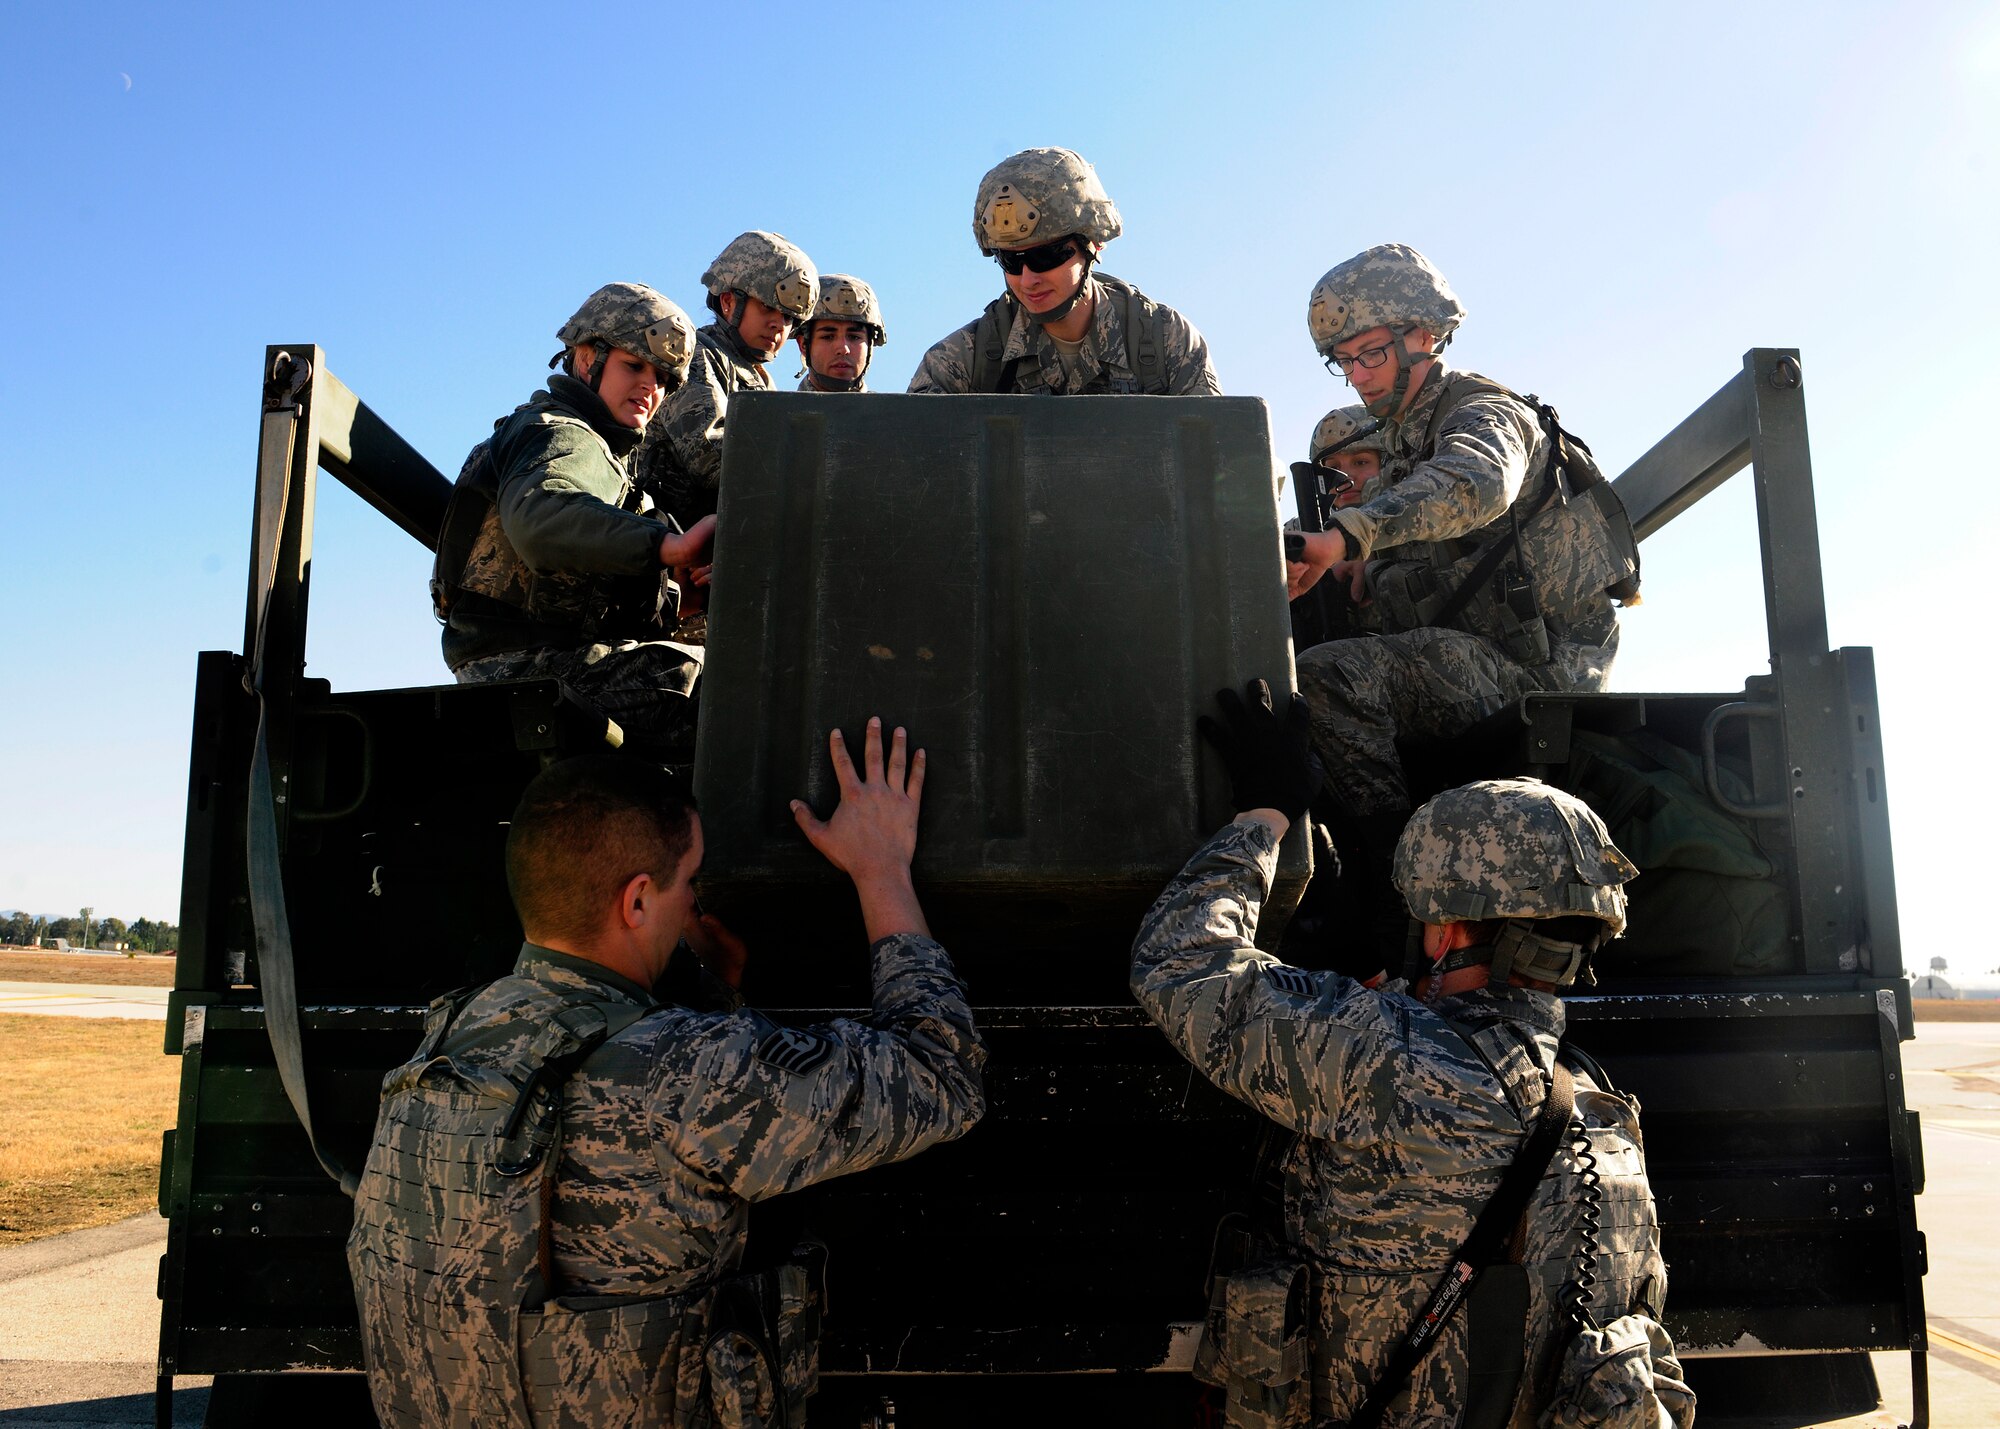 Airmen from the 39th Security Forces Squadron load gear and personnel into the back of a truck after participating in a wing exercise Jan. 15, 2016, at Incirlik Air Base, Turkey. The gear was used as part of a wing exercise in which security forces practiced security measure techniques on simulated threats. (U.S. Air Force photo by Senior Airman Krystal Ardrey/Released)